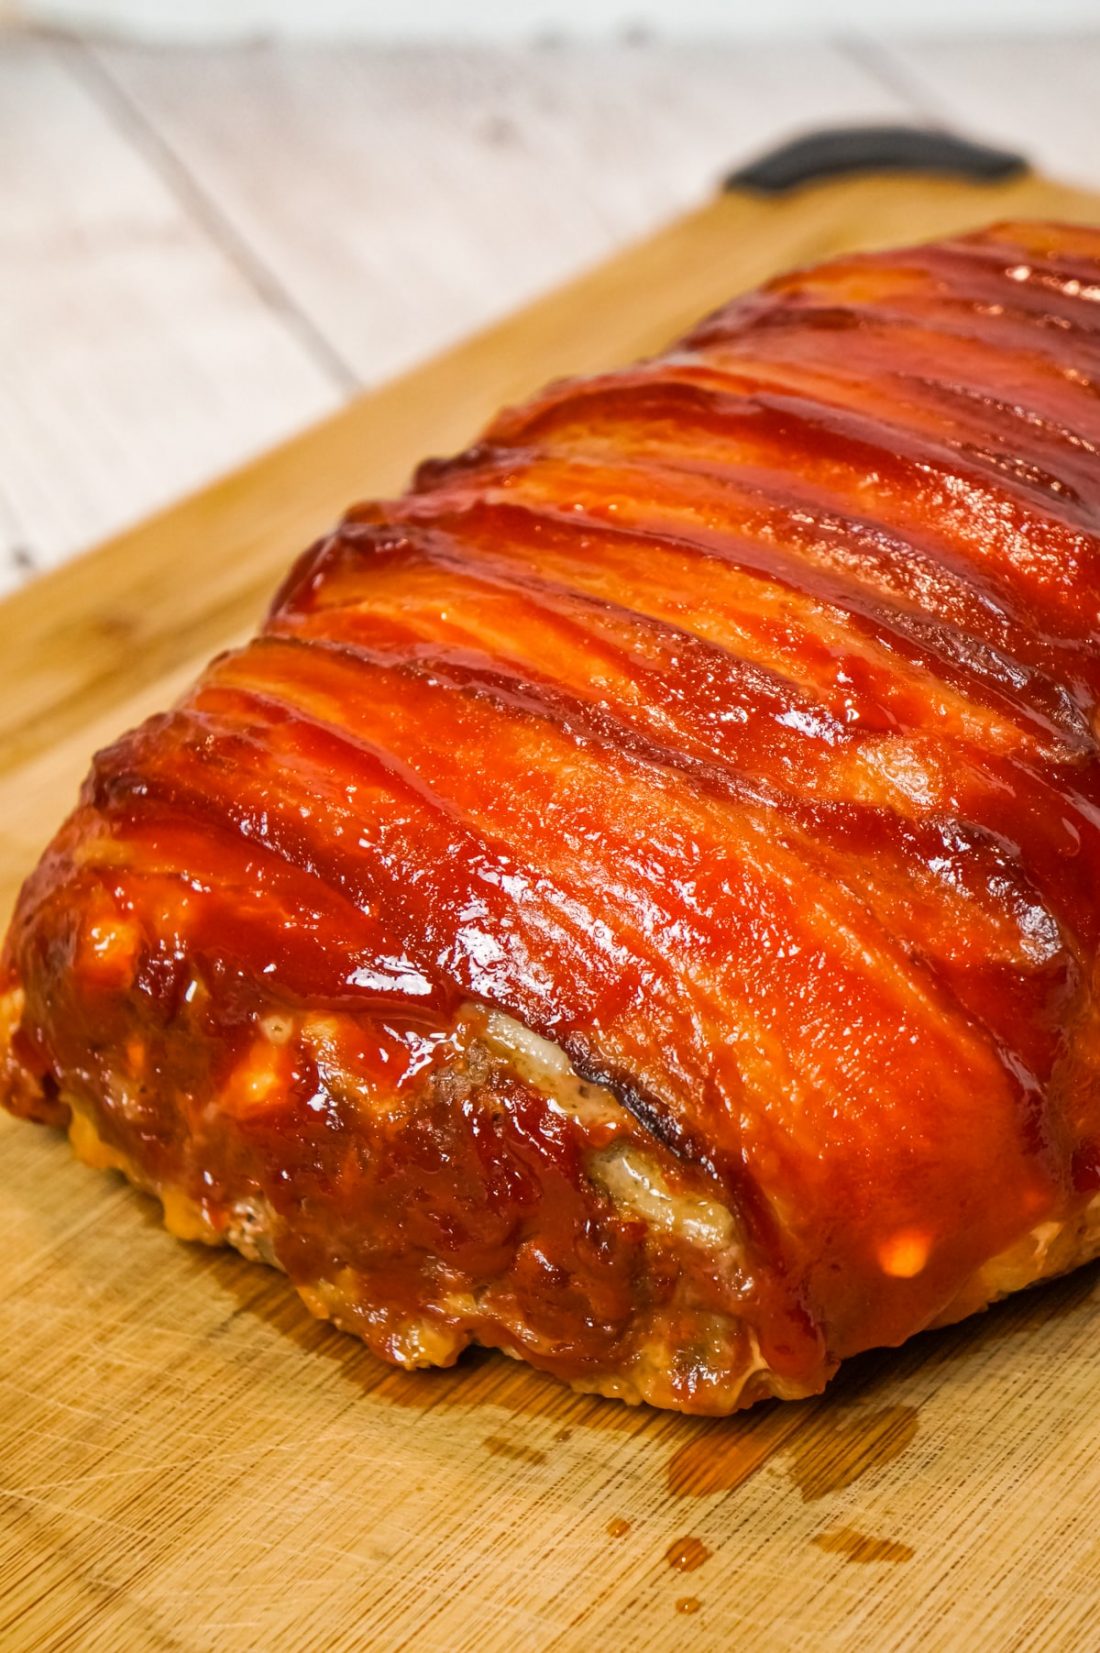 Bacon Wrapped Meatloaf - THIS IS NOT DIET FOOD